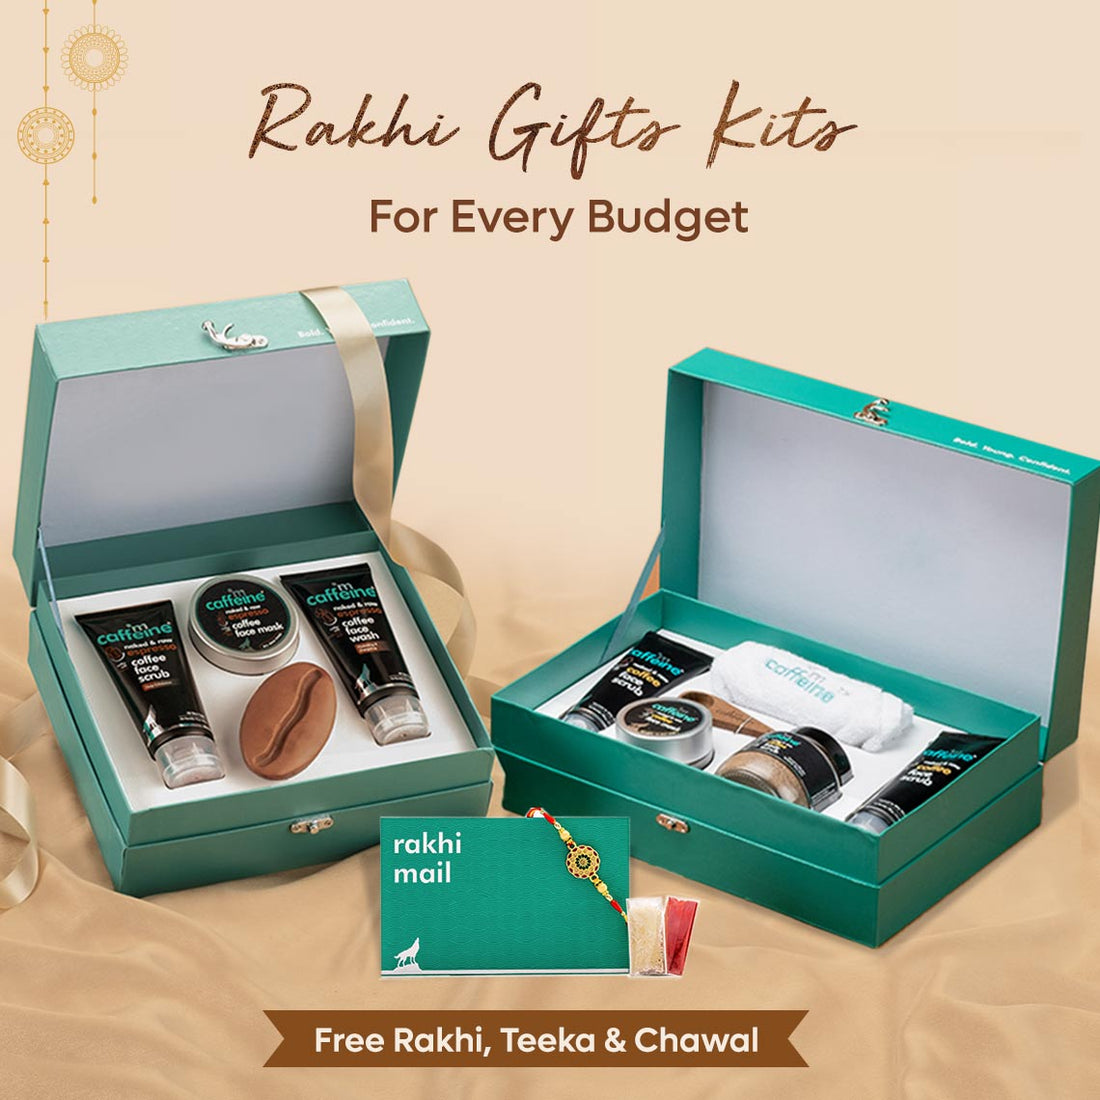 Rakhi Gifts Kits For Every Budget